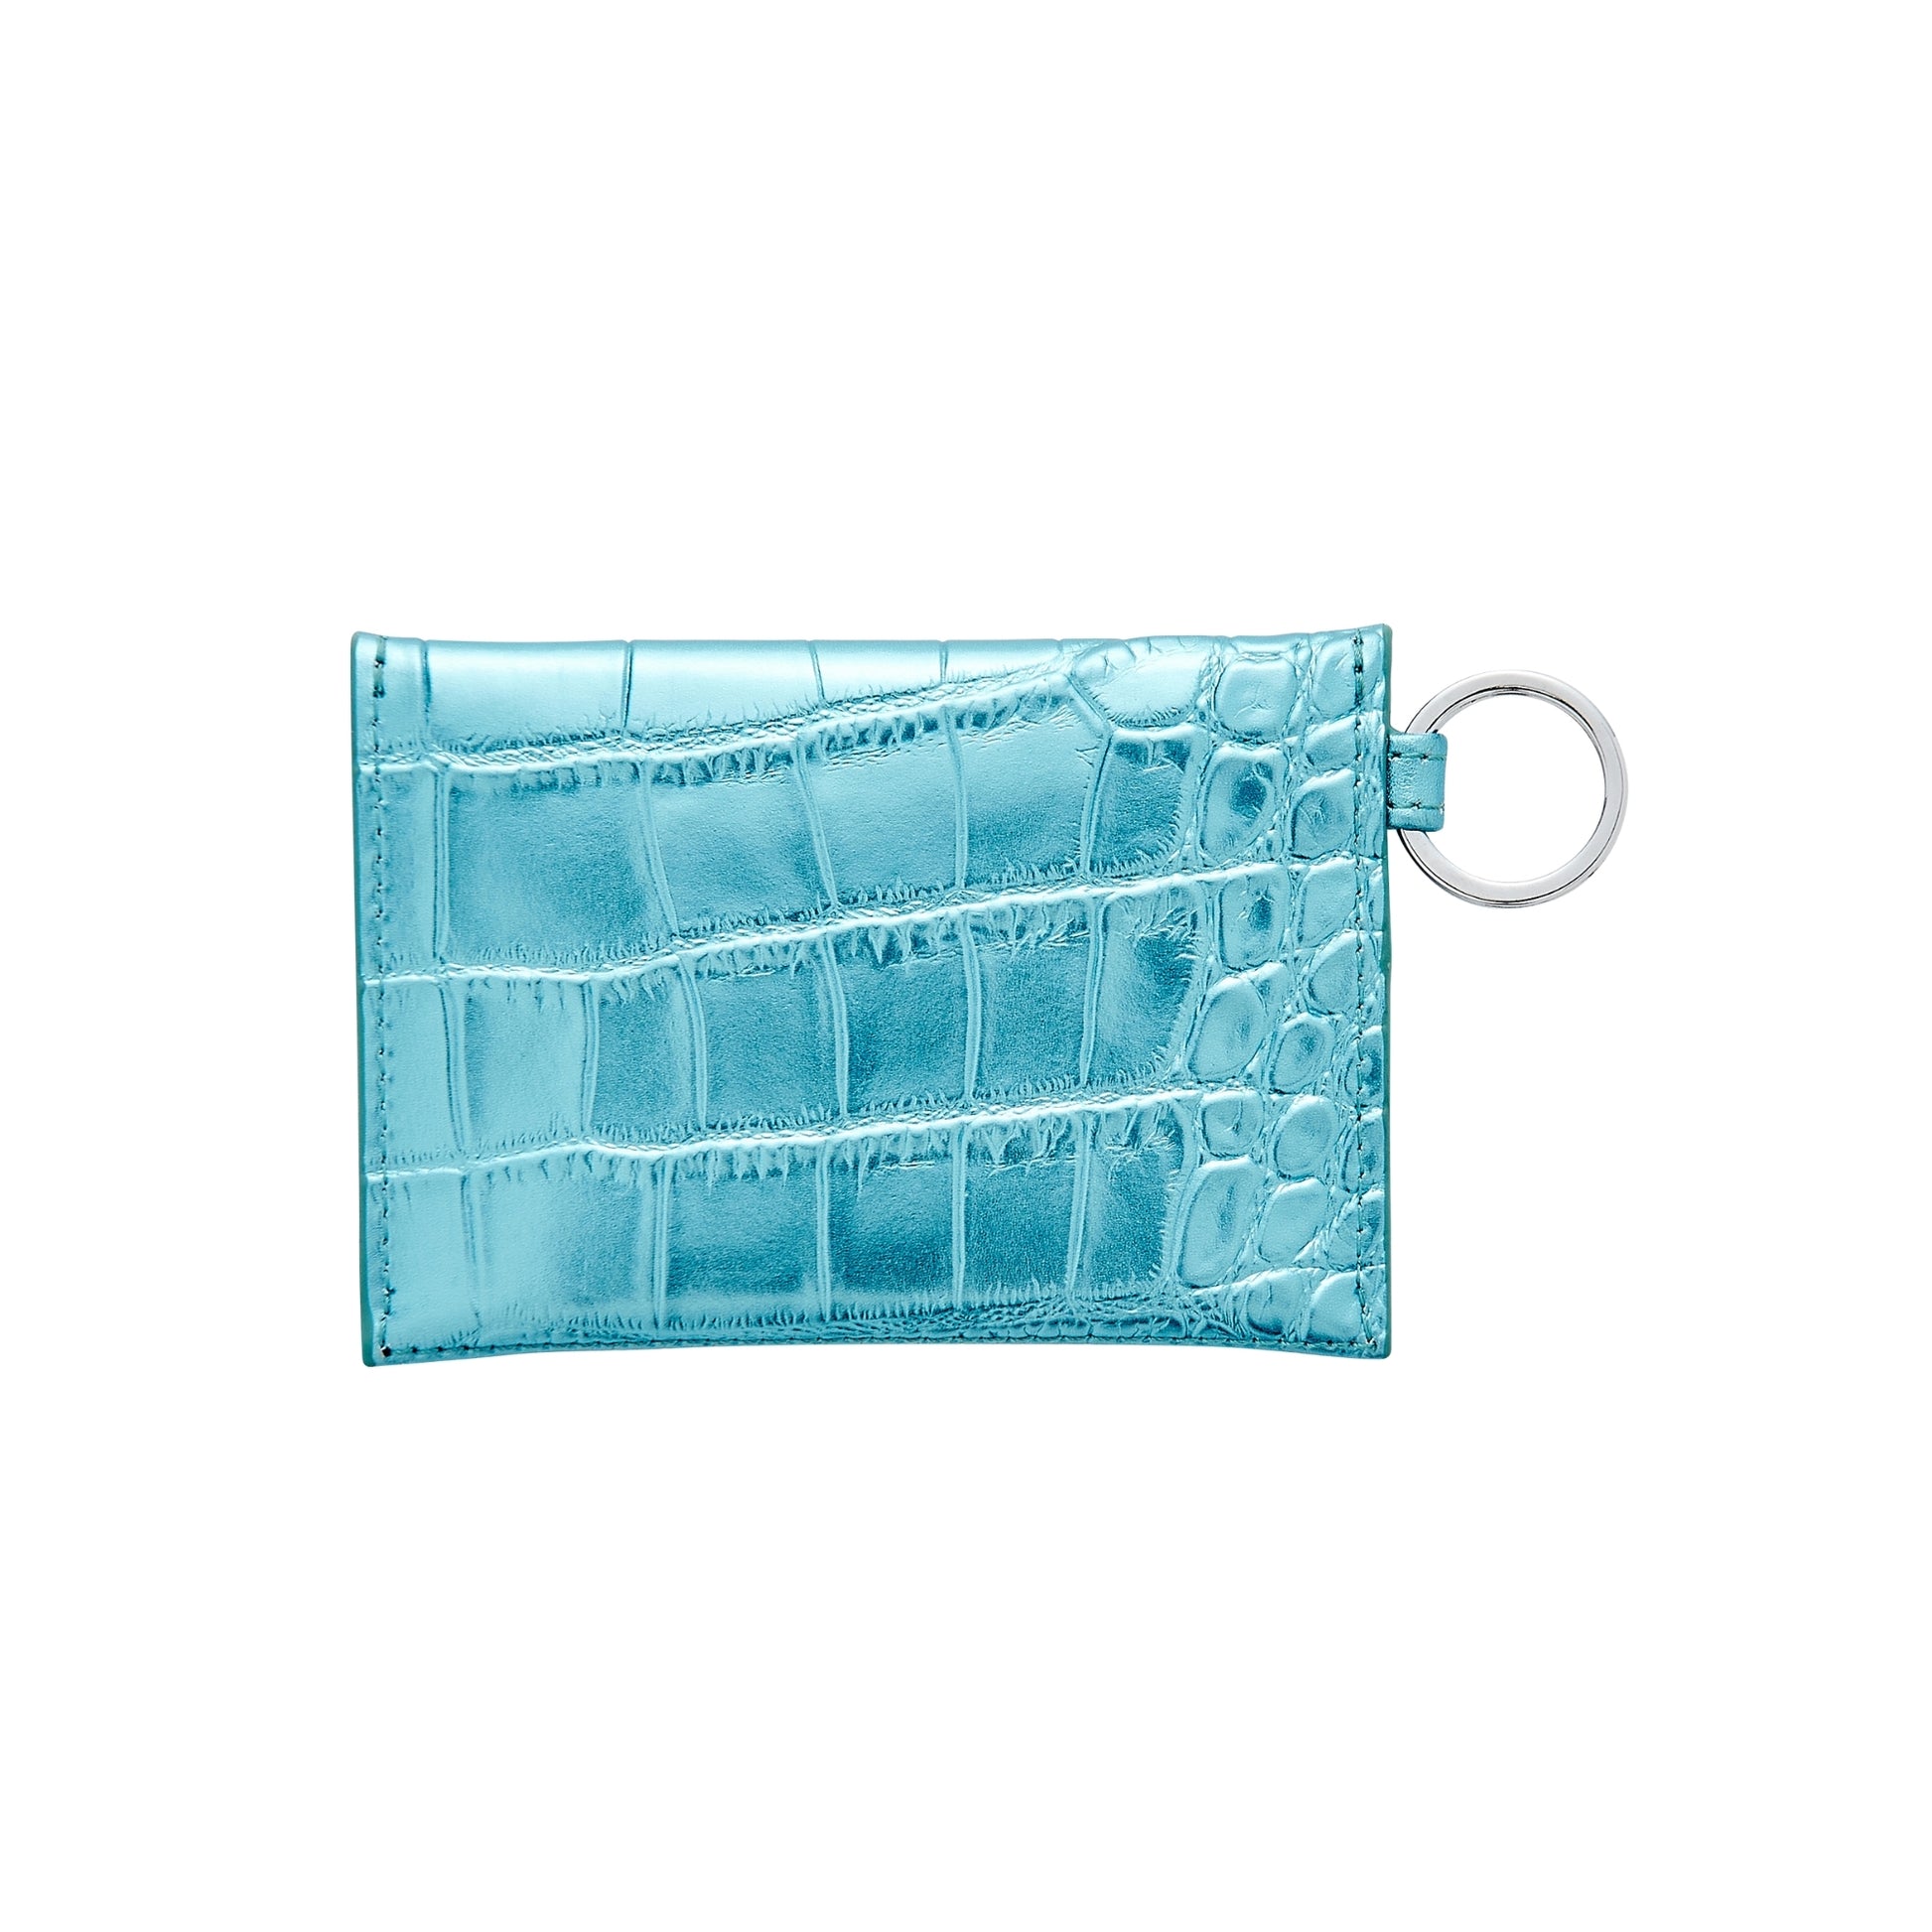 Metallic light blue croc embossed mini envelope with silver hardware showing the backside